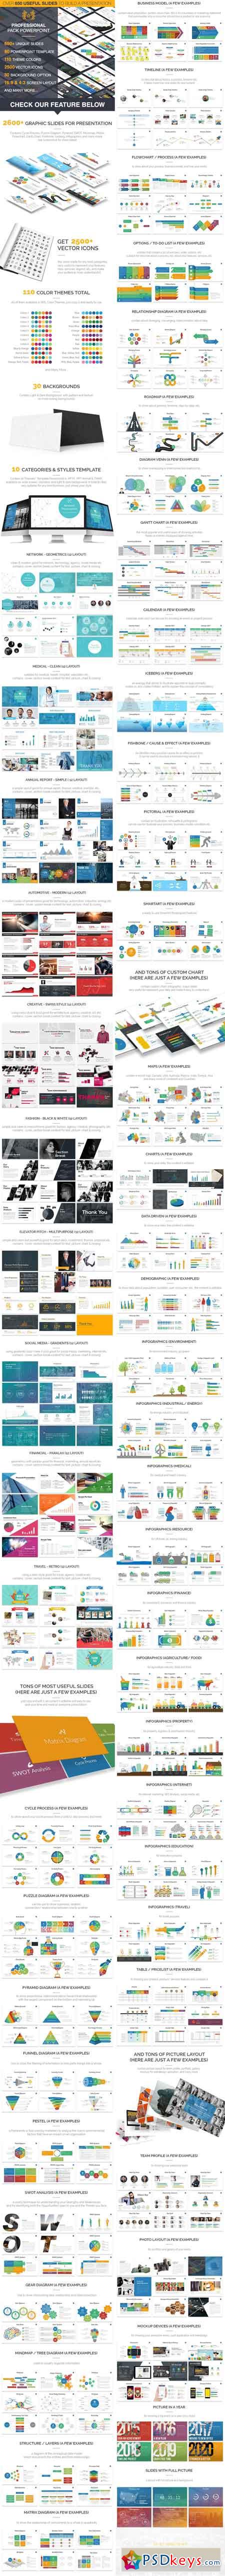 Powerpoint Template Professional Pack 18843606